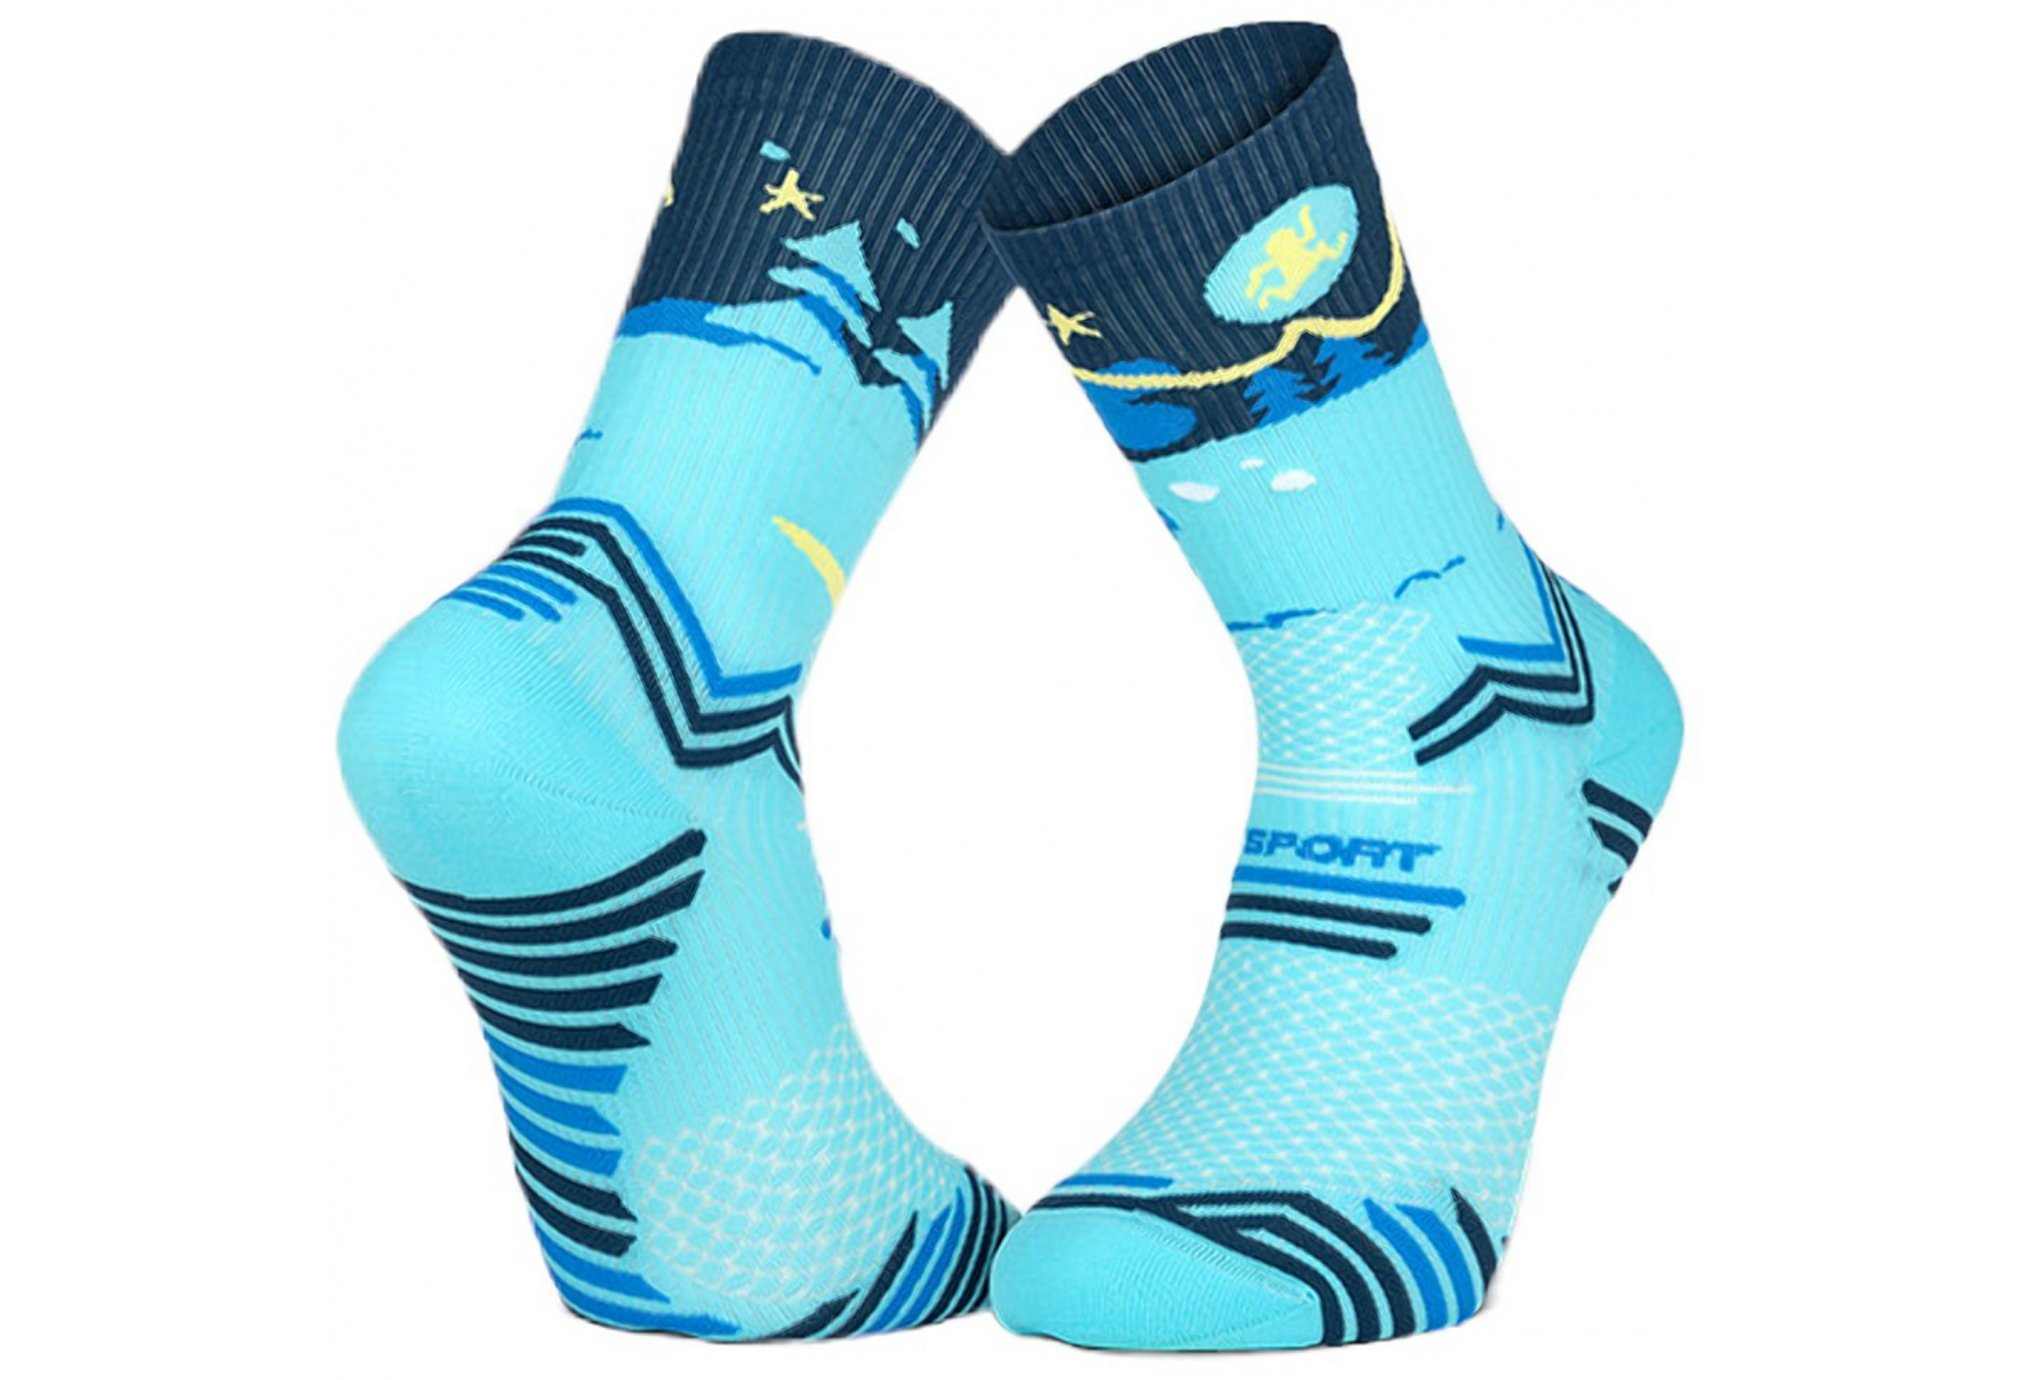 BV Sport Trail Ultra Collector DBDB Chaussettes